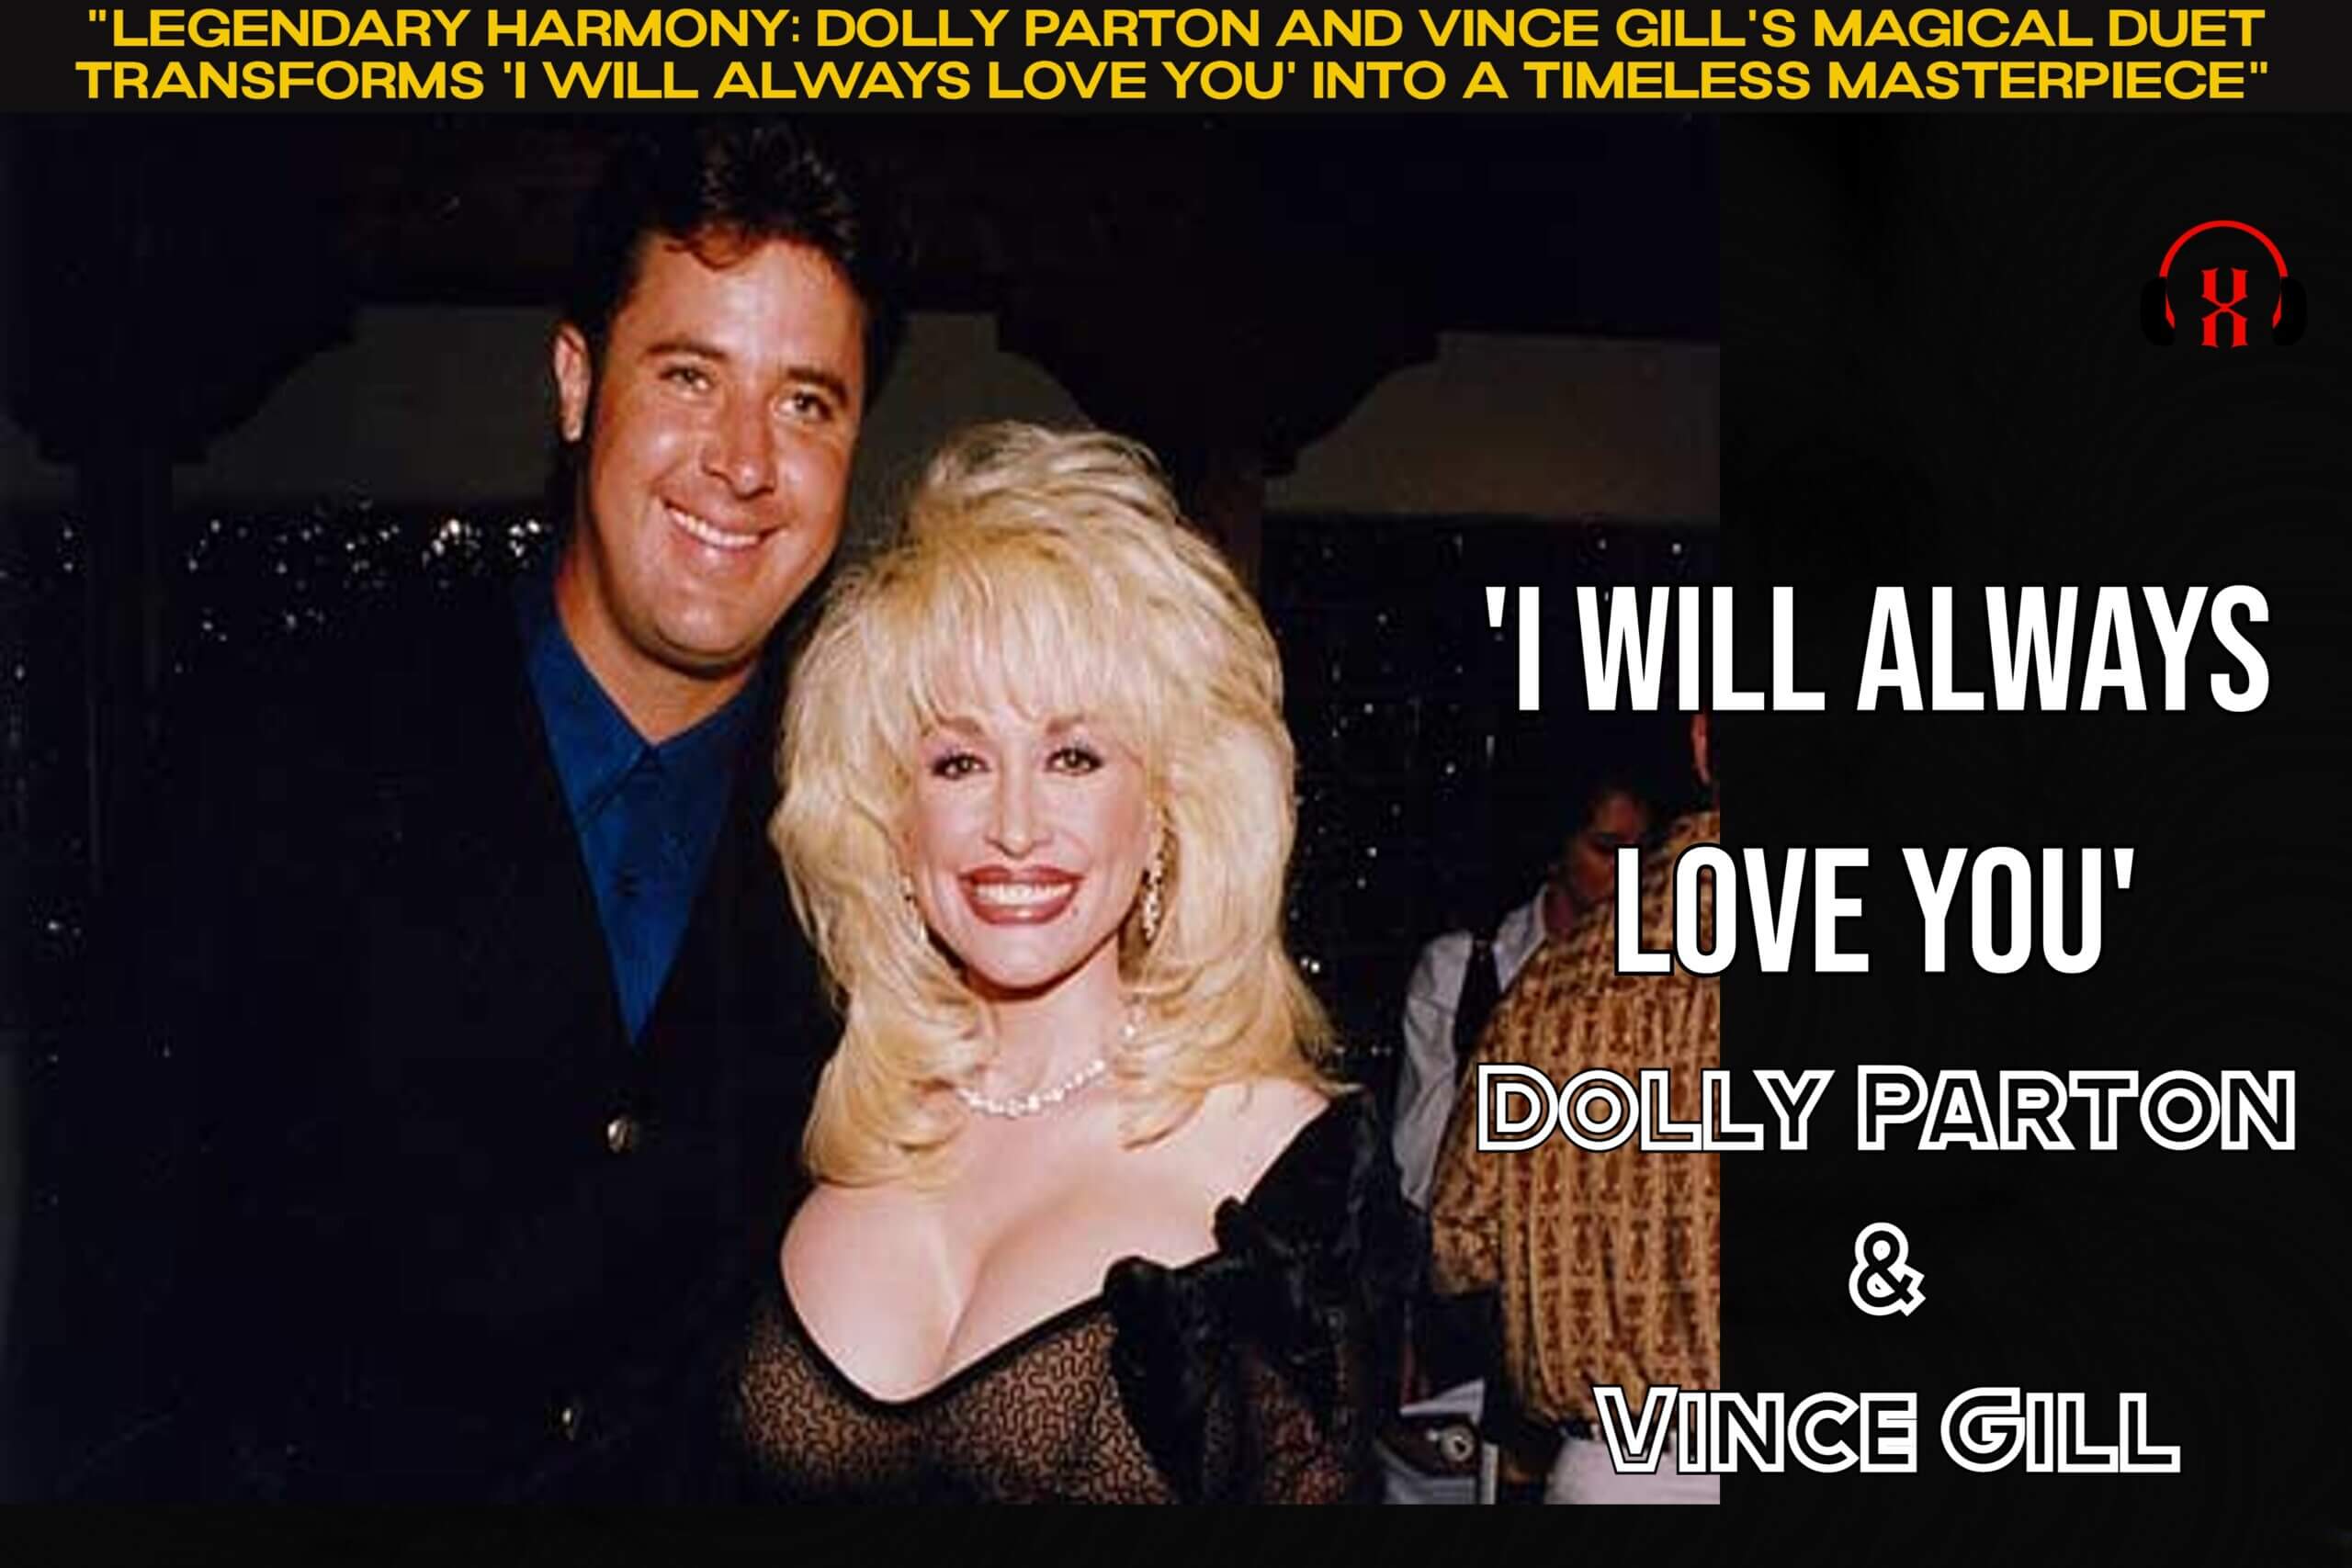 “Legendary Harmony: Dolly Parton and Vince Gill’s Magical Duet Transforms ‘I Will Always Love You’ into a Timeless Masterpiece”